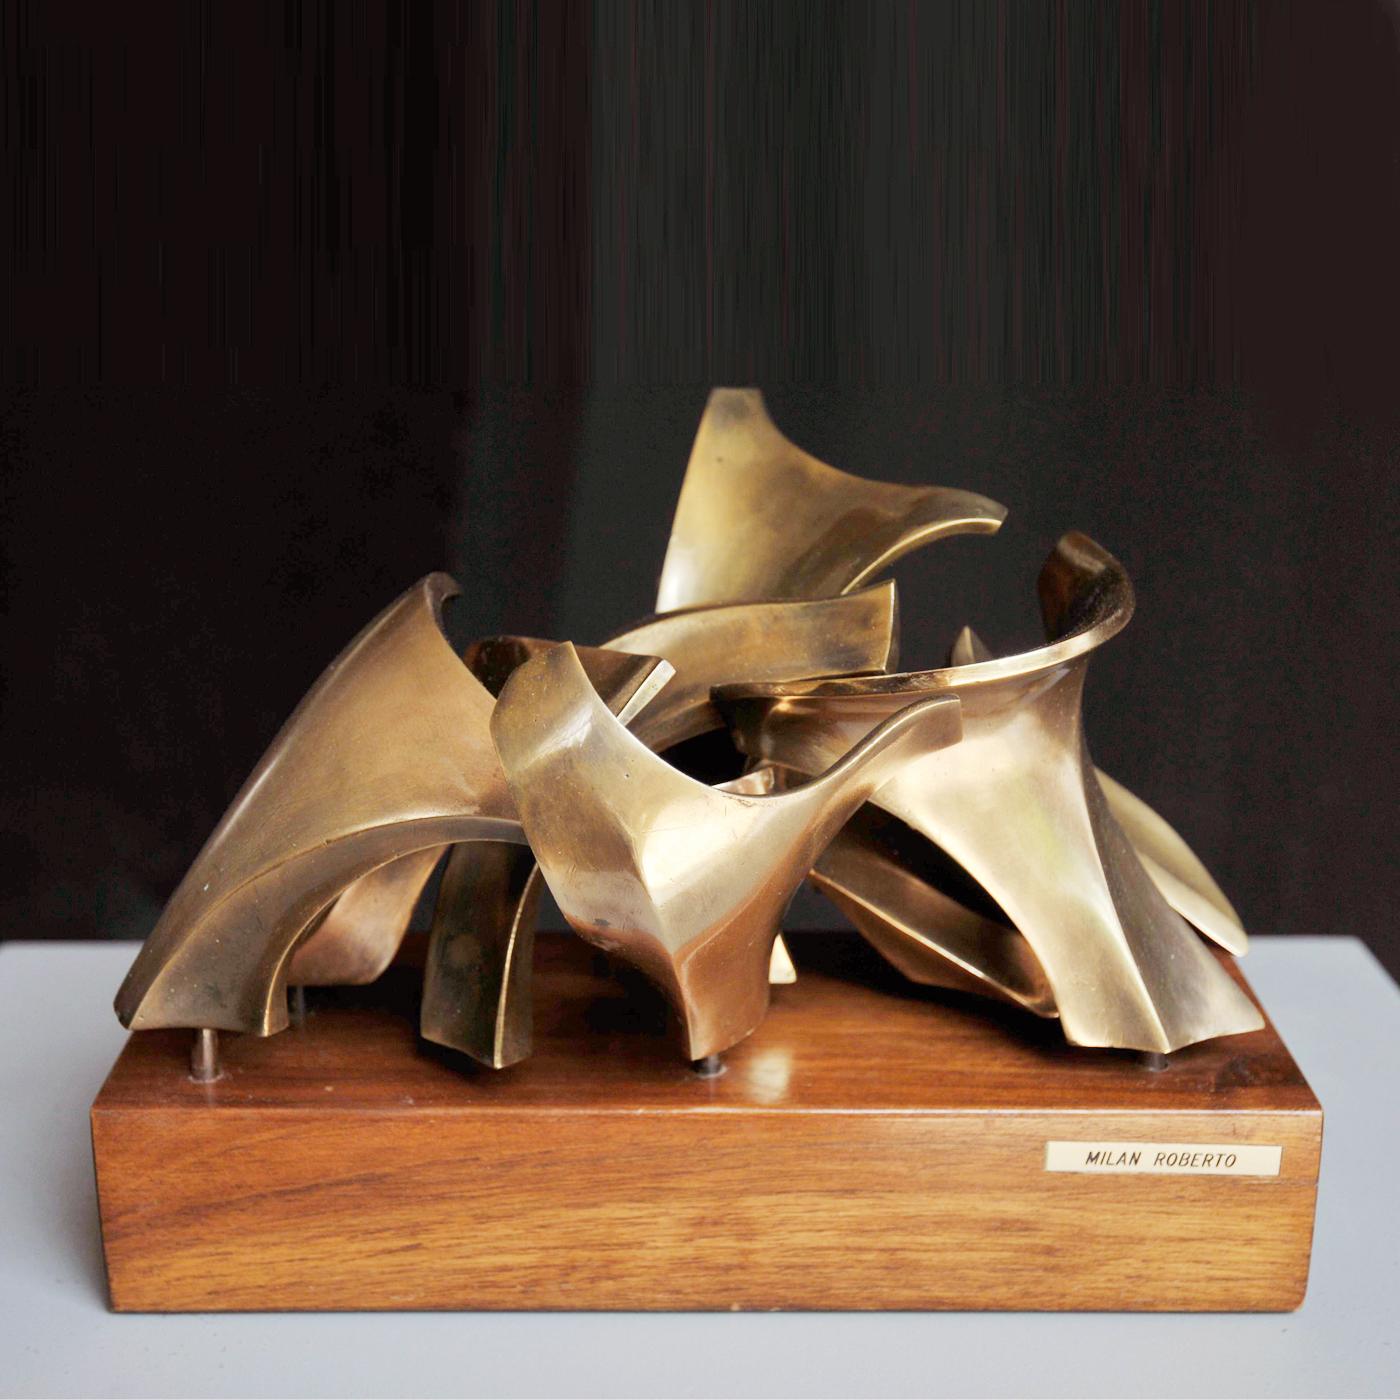 Bronze sculpture with free rounded forms resting on a wooden base. The single elements, achieved through a traditional bronze casting process, evoke movement due to their suppleness which molds to the surrounding spaces. A luminous and modern art